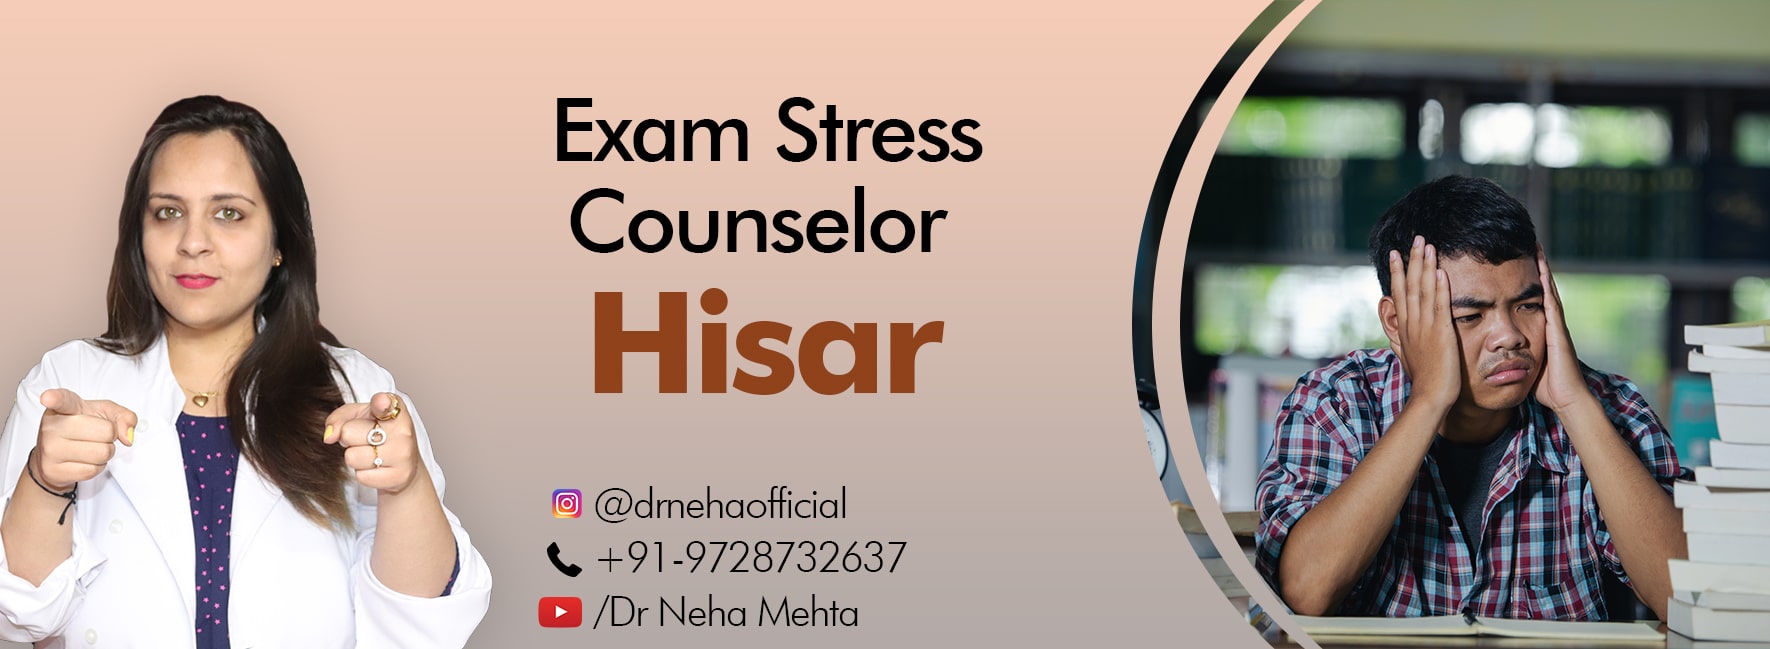 exam-stress-counselor-in-hisar